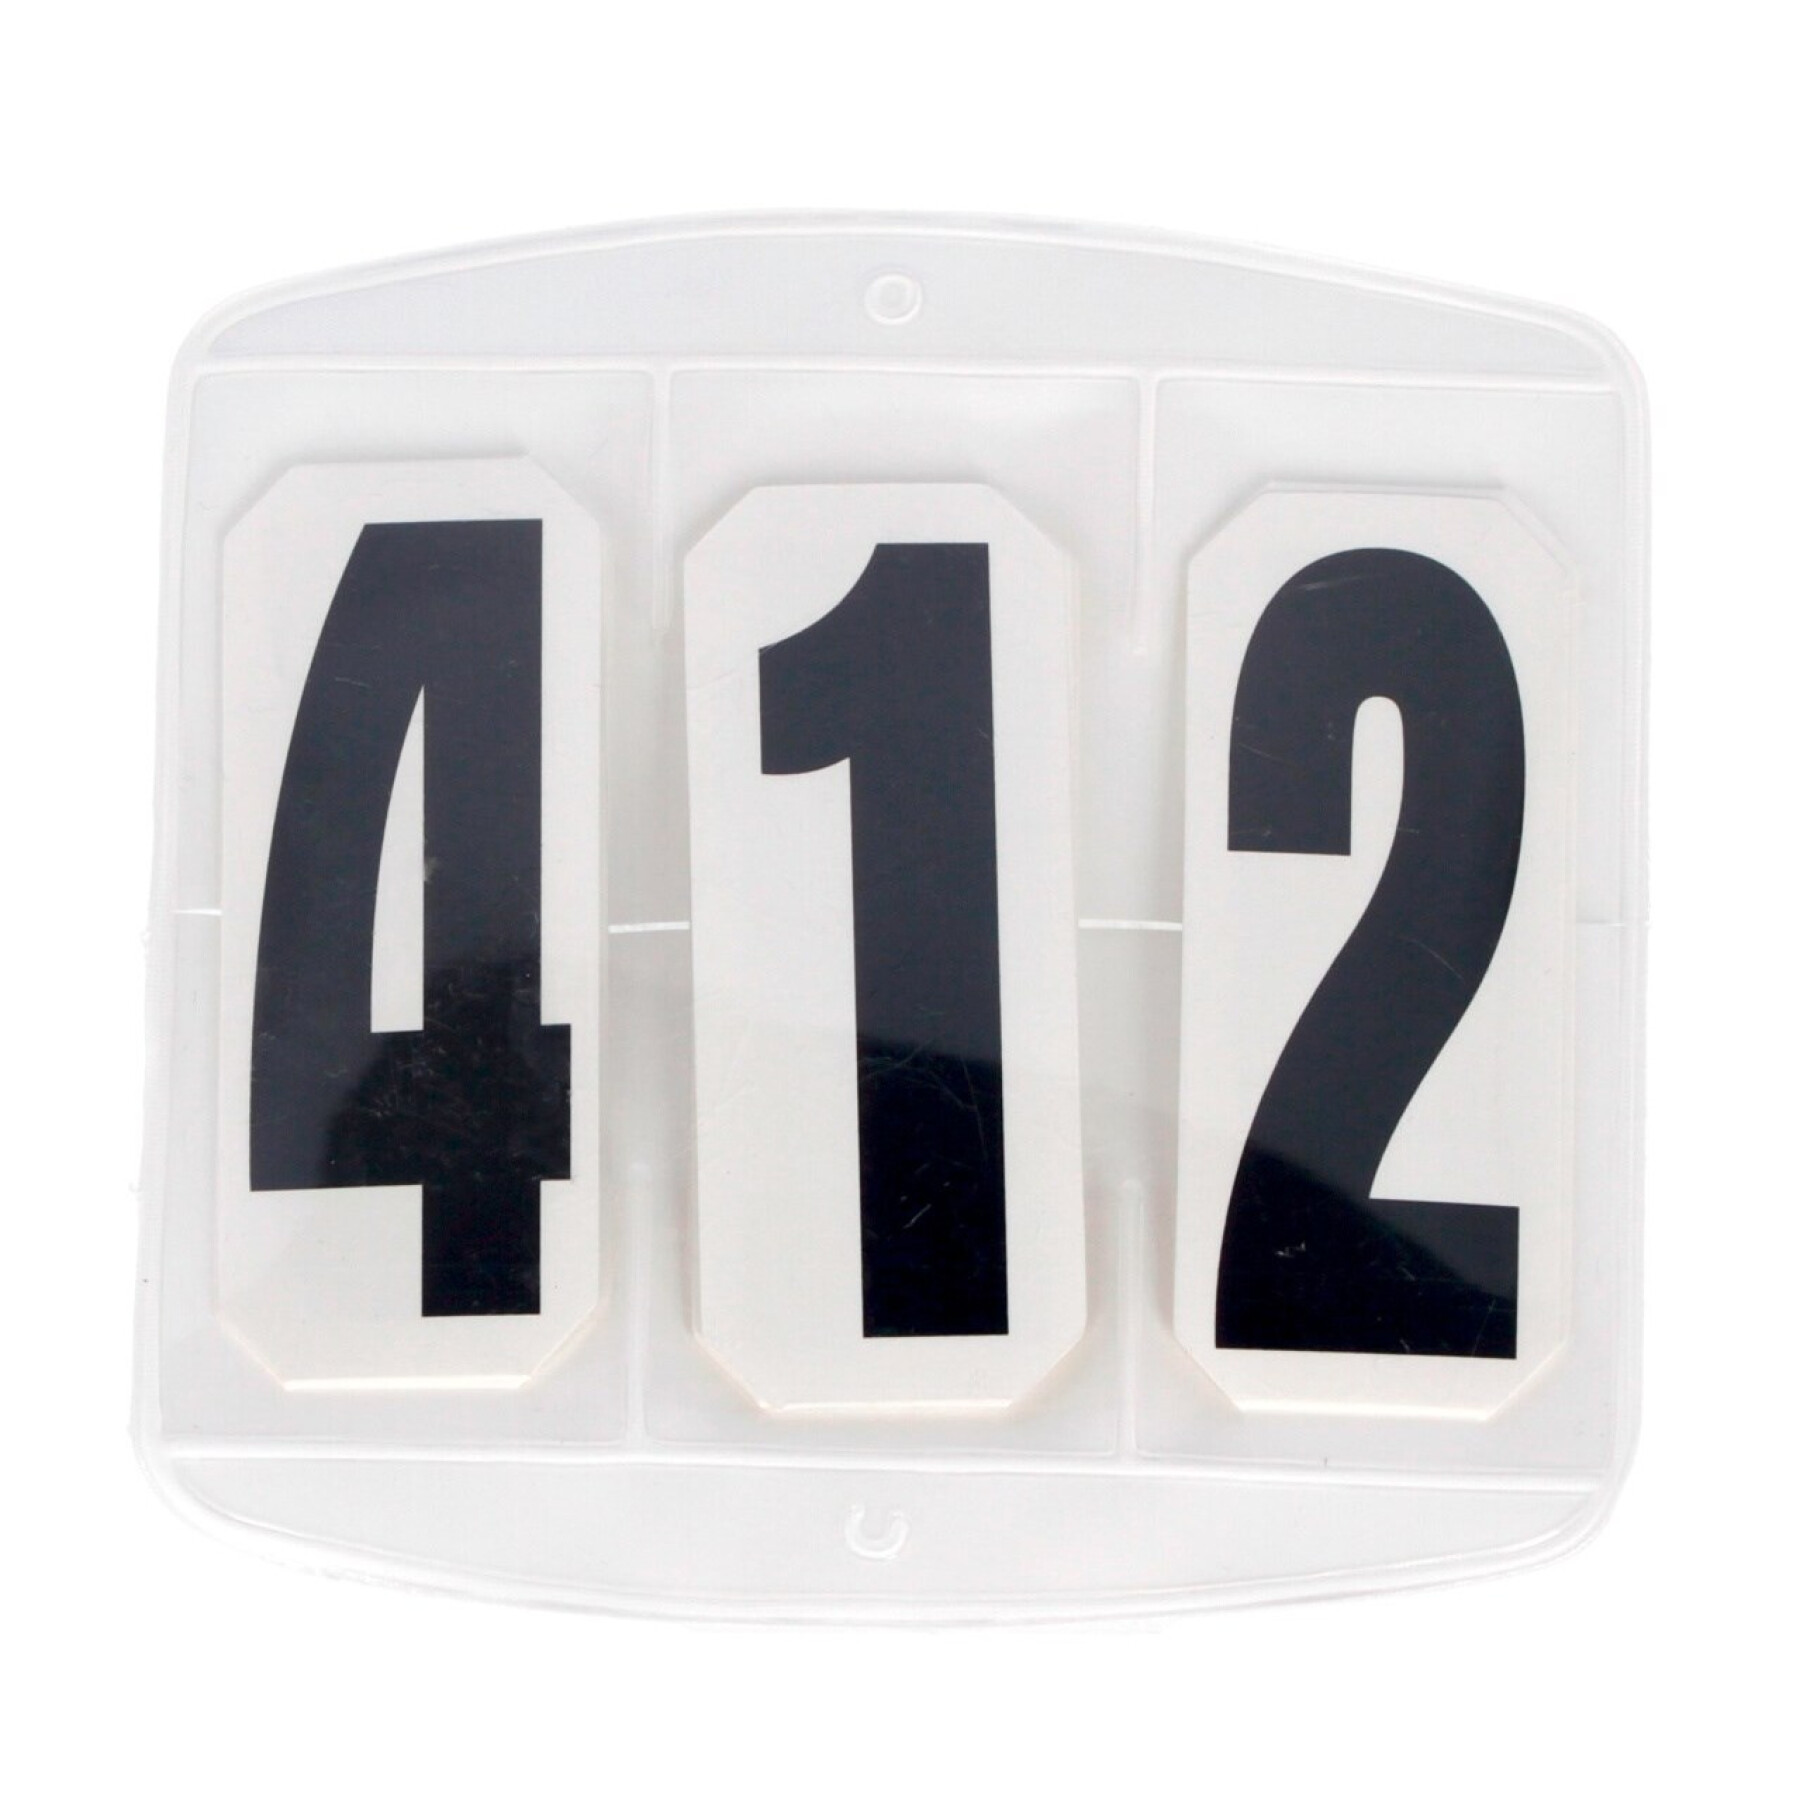 3-digit riding competition numbers Kerbl Velcro